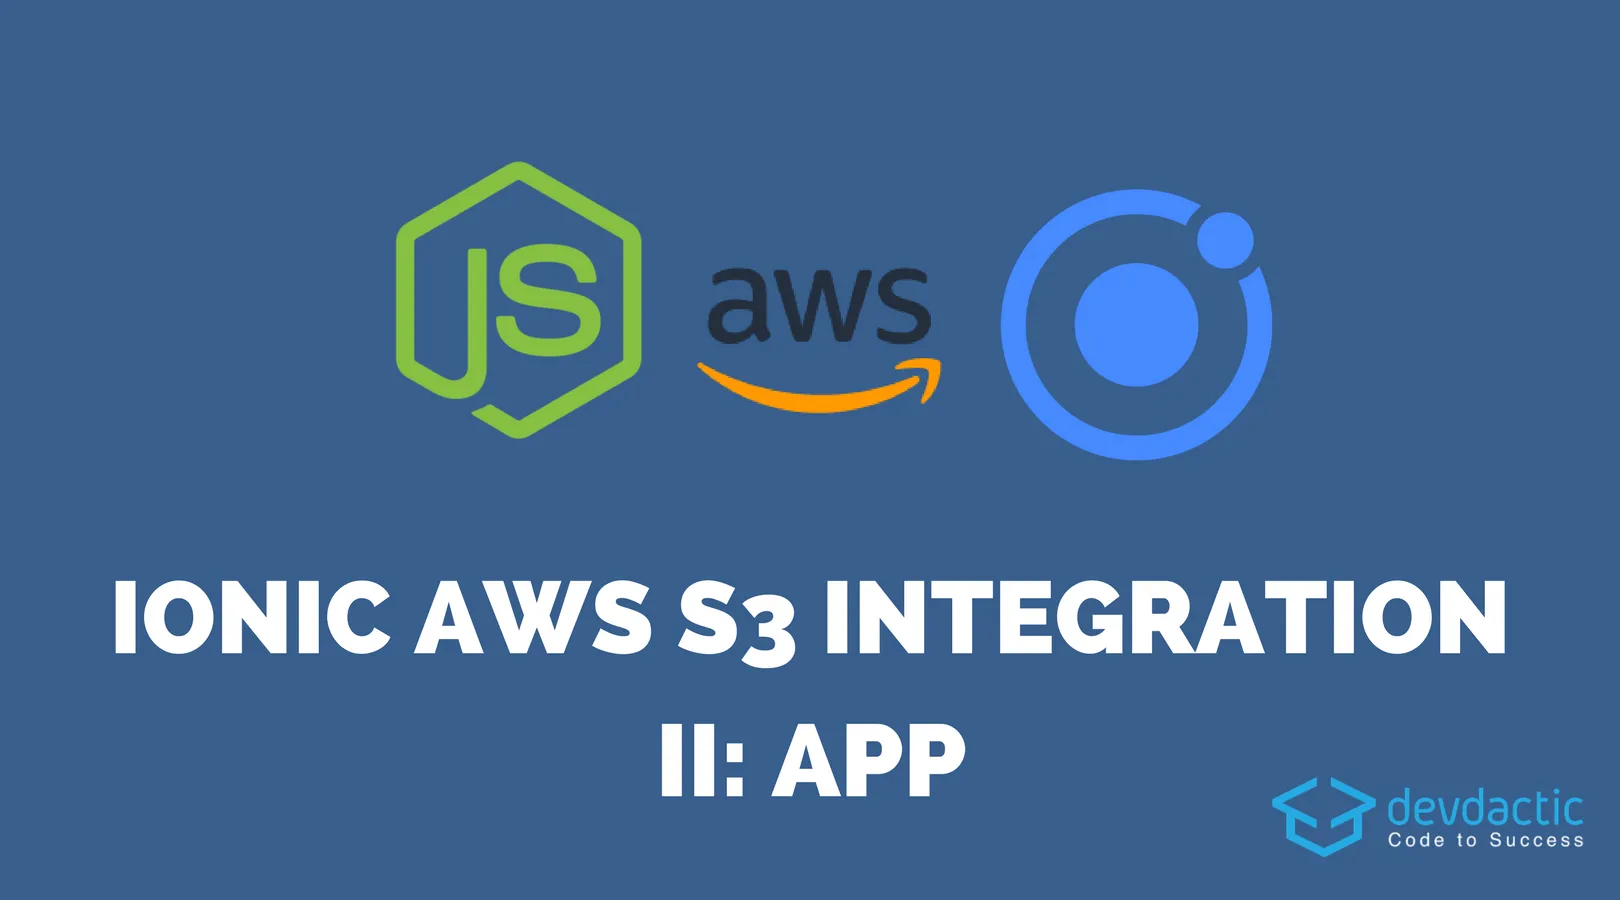 Ionic AWS S3 Integration with NodeJS - Part 2: Ionic App